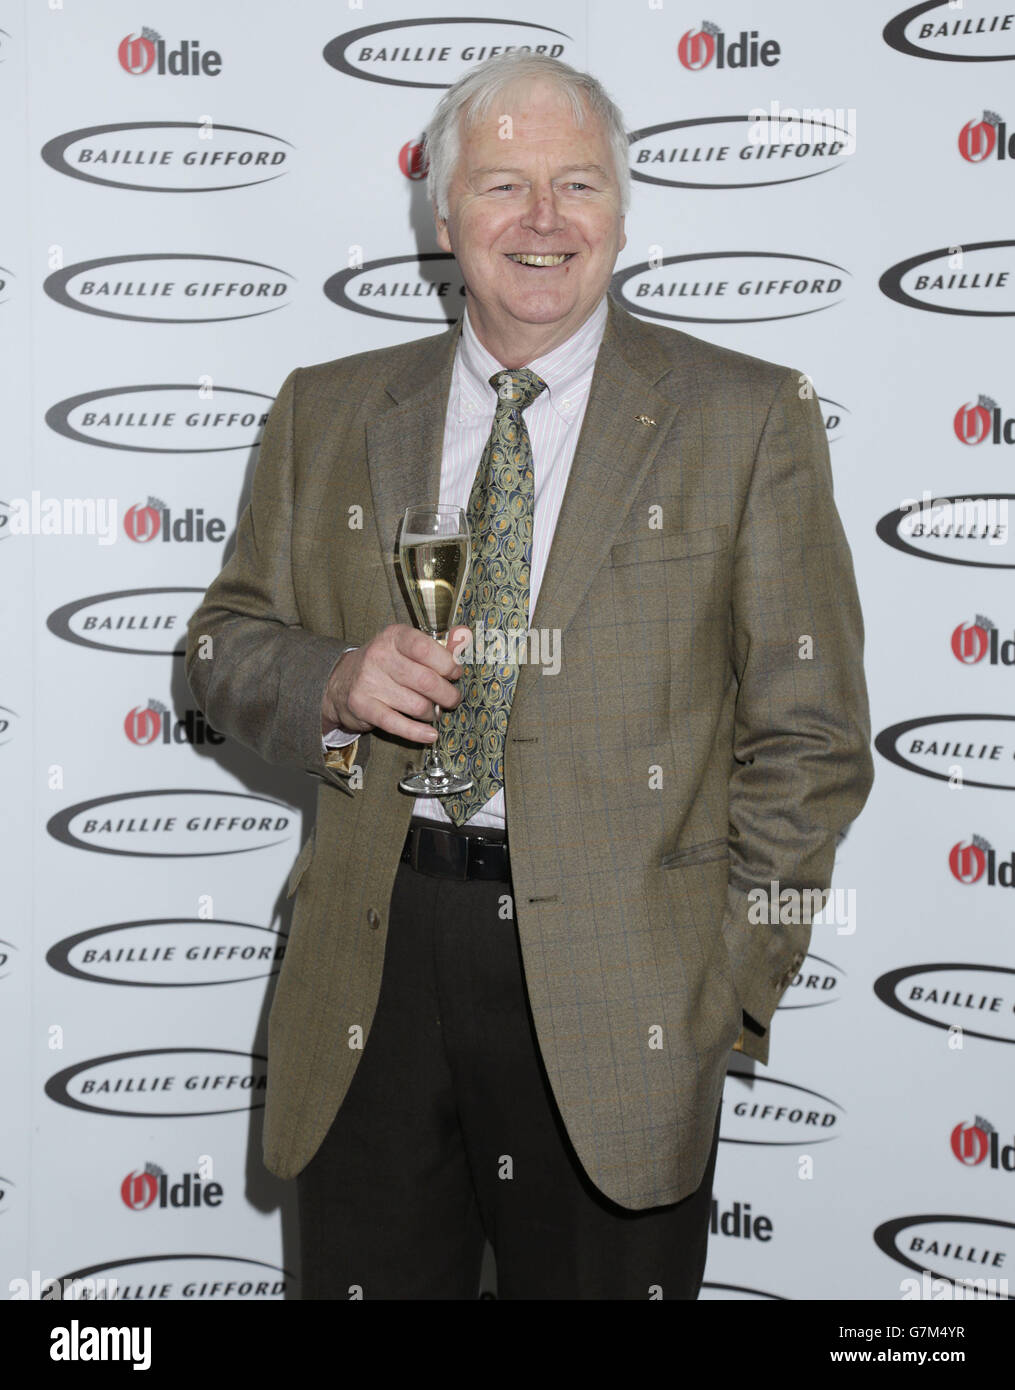 Oldie of The Year Awards 2015 - London. Ian Lavender arriving for The Oldie of the Year Awards, at Simpsons in the Strand, London. Stock Photo